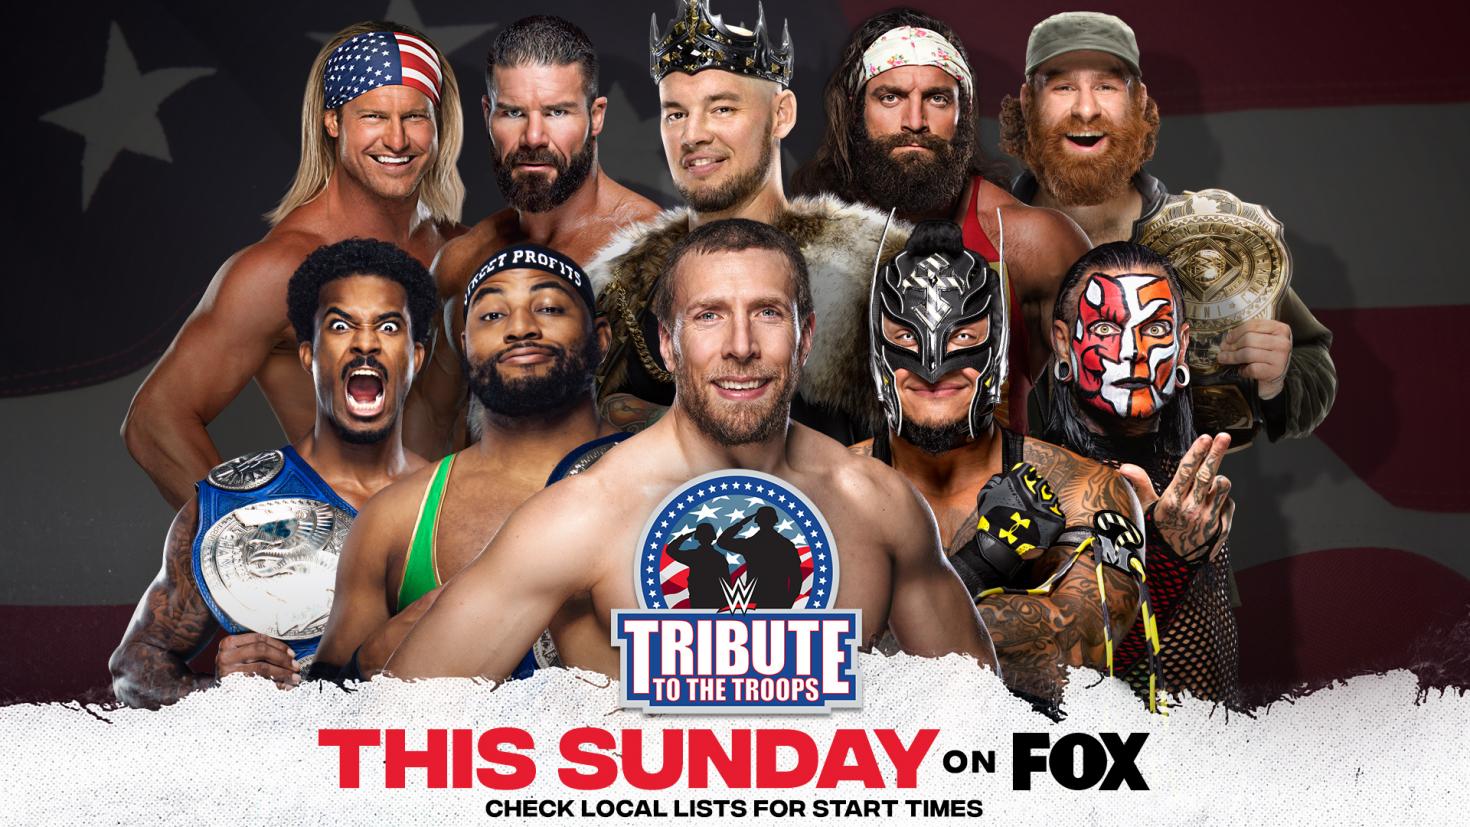 Three Matches Announced for Tribute to the Troops This Sunday TPWW